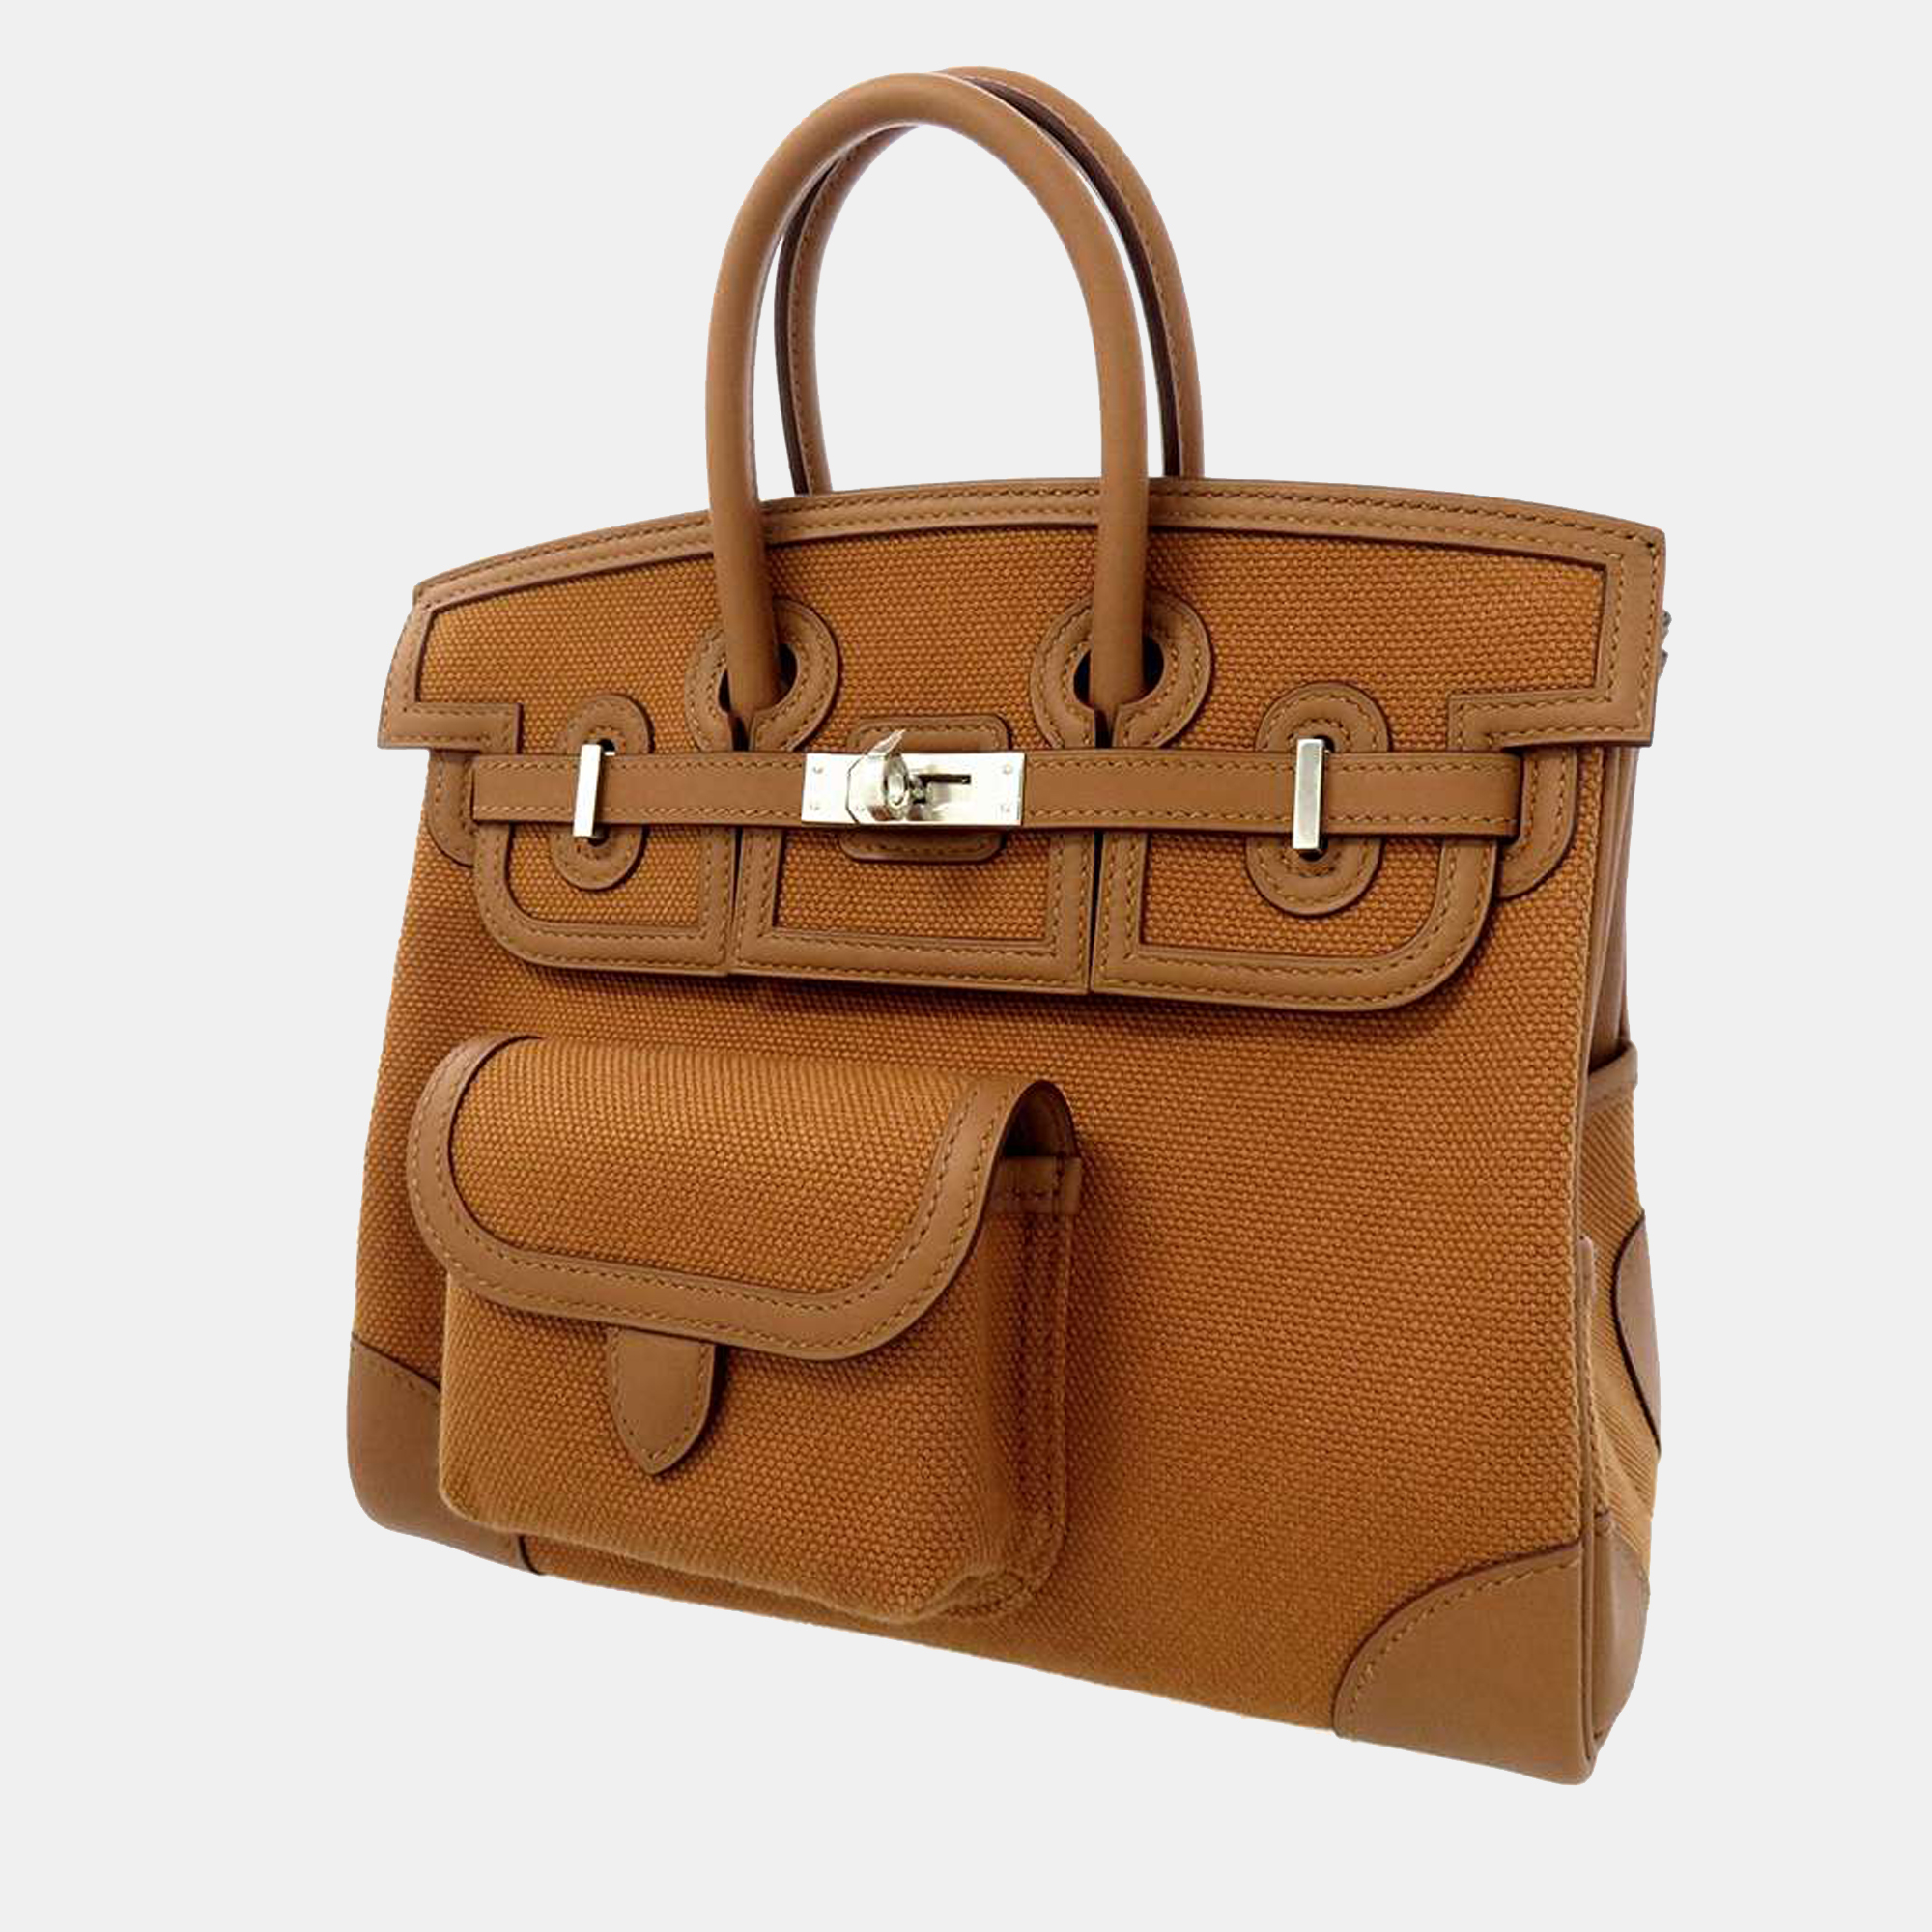 Hermes Gold Toile Canvas and Swift Leather Palladium Plated Hardware Birkin Cargo 25 Tote Bag